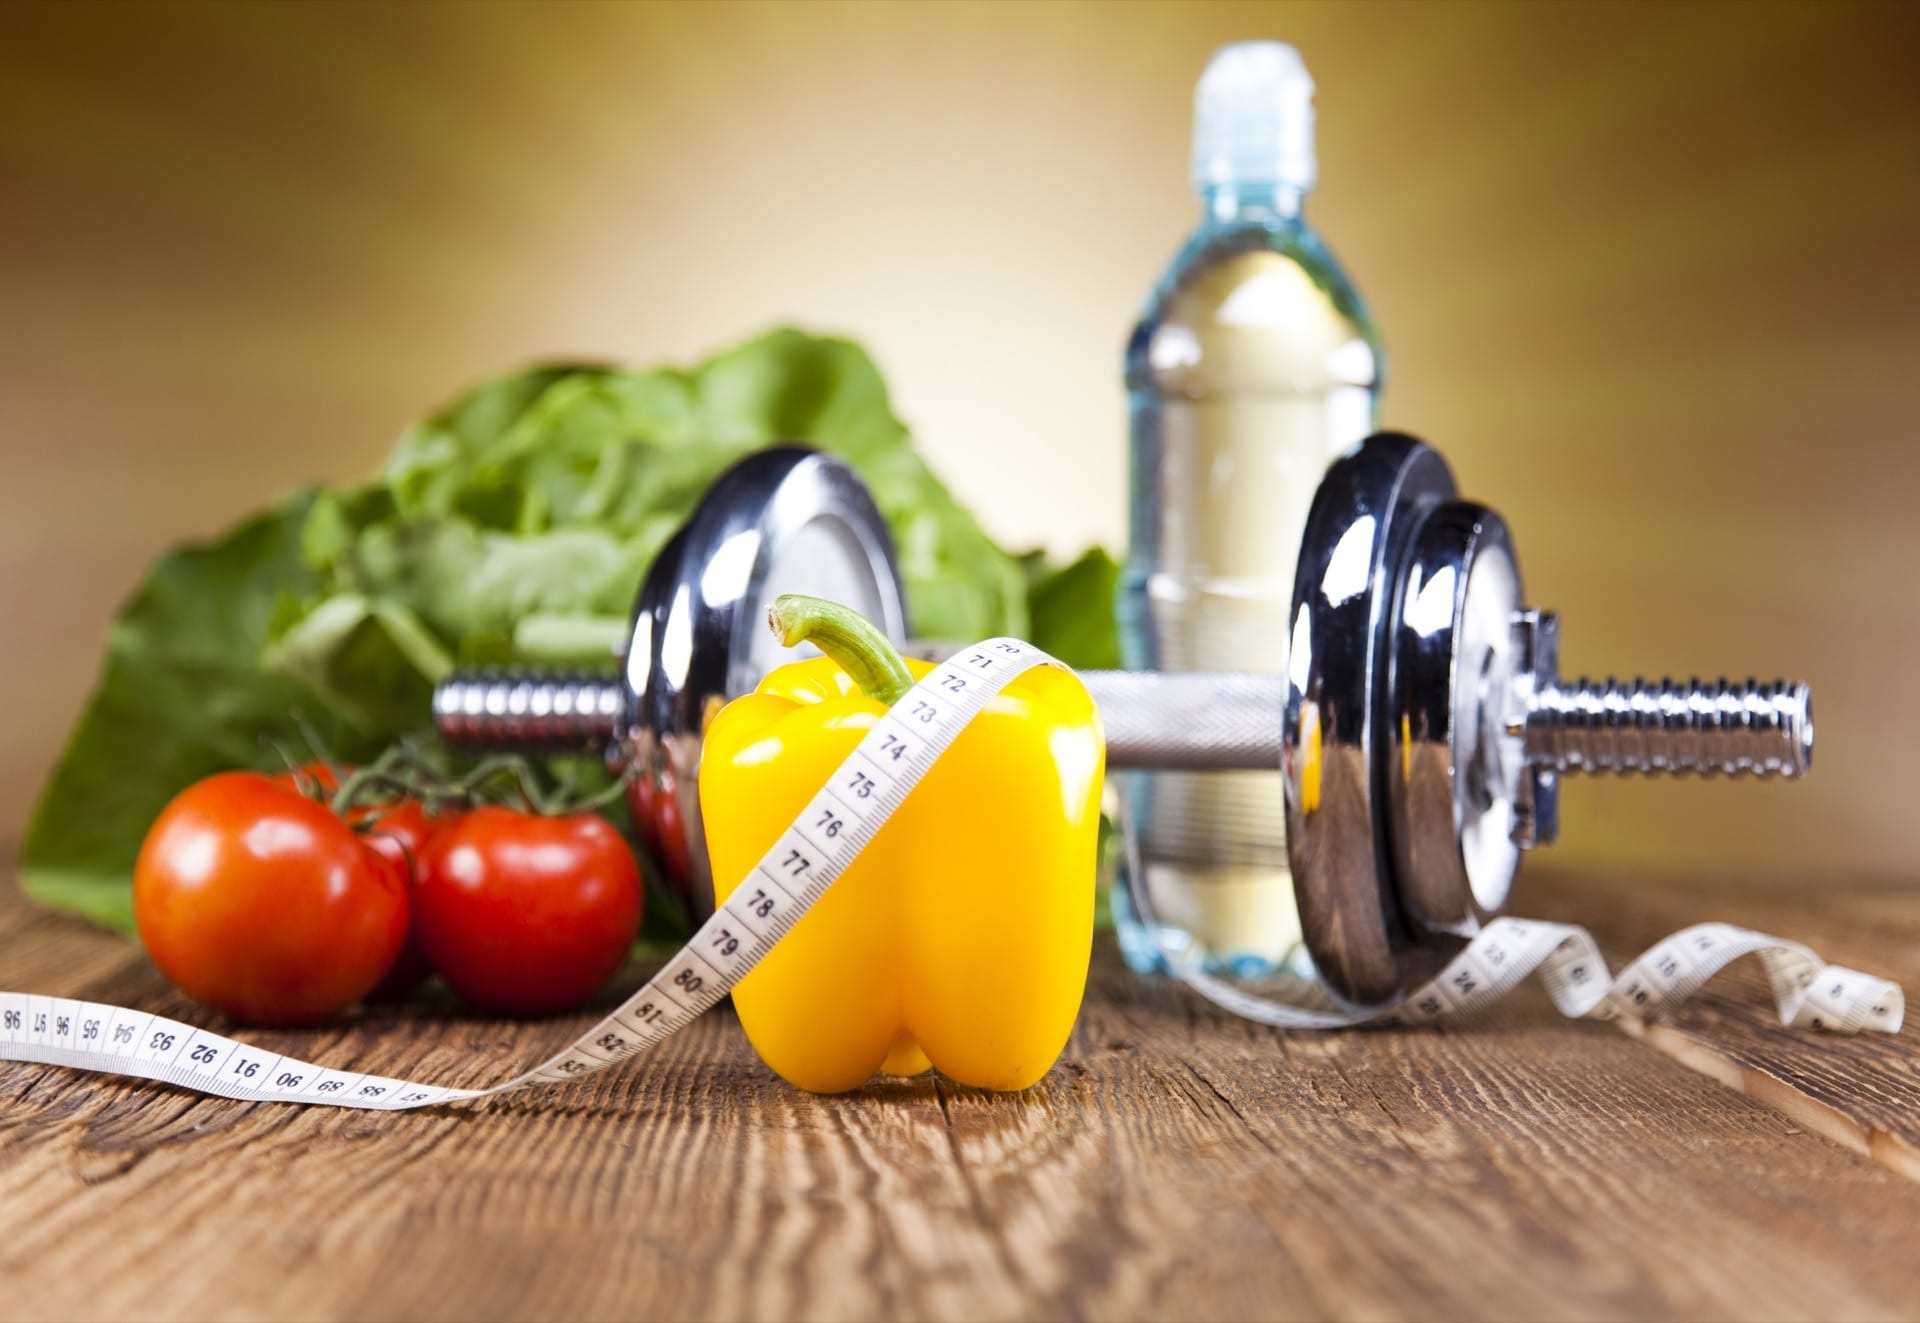 Diet and Exercise for Men's Health